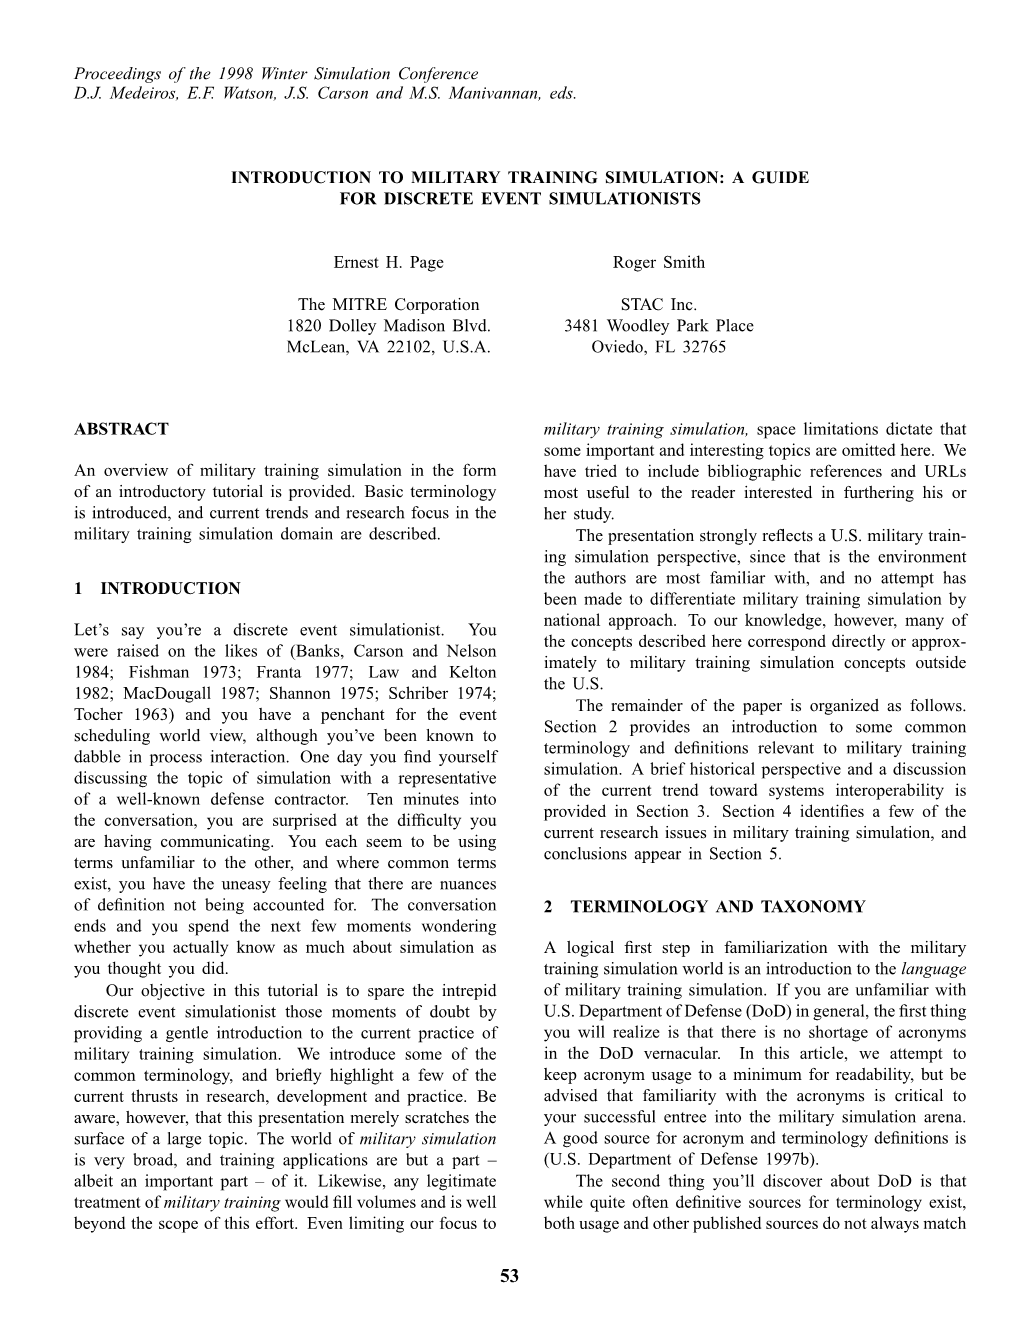 1998: Introduction to Military Training Simulation: a Guide for Discrete Event Simulationists